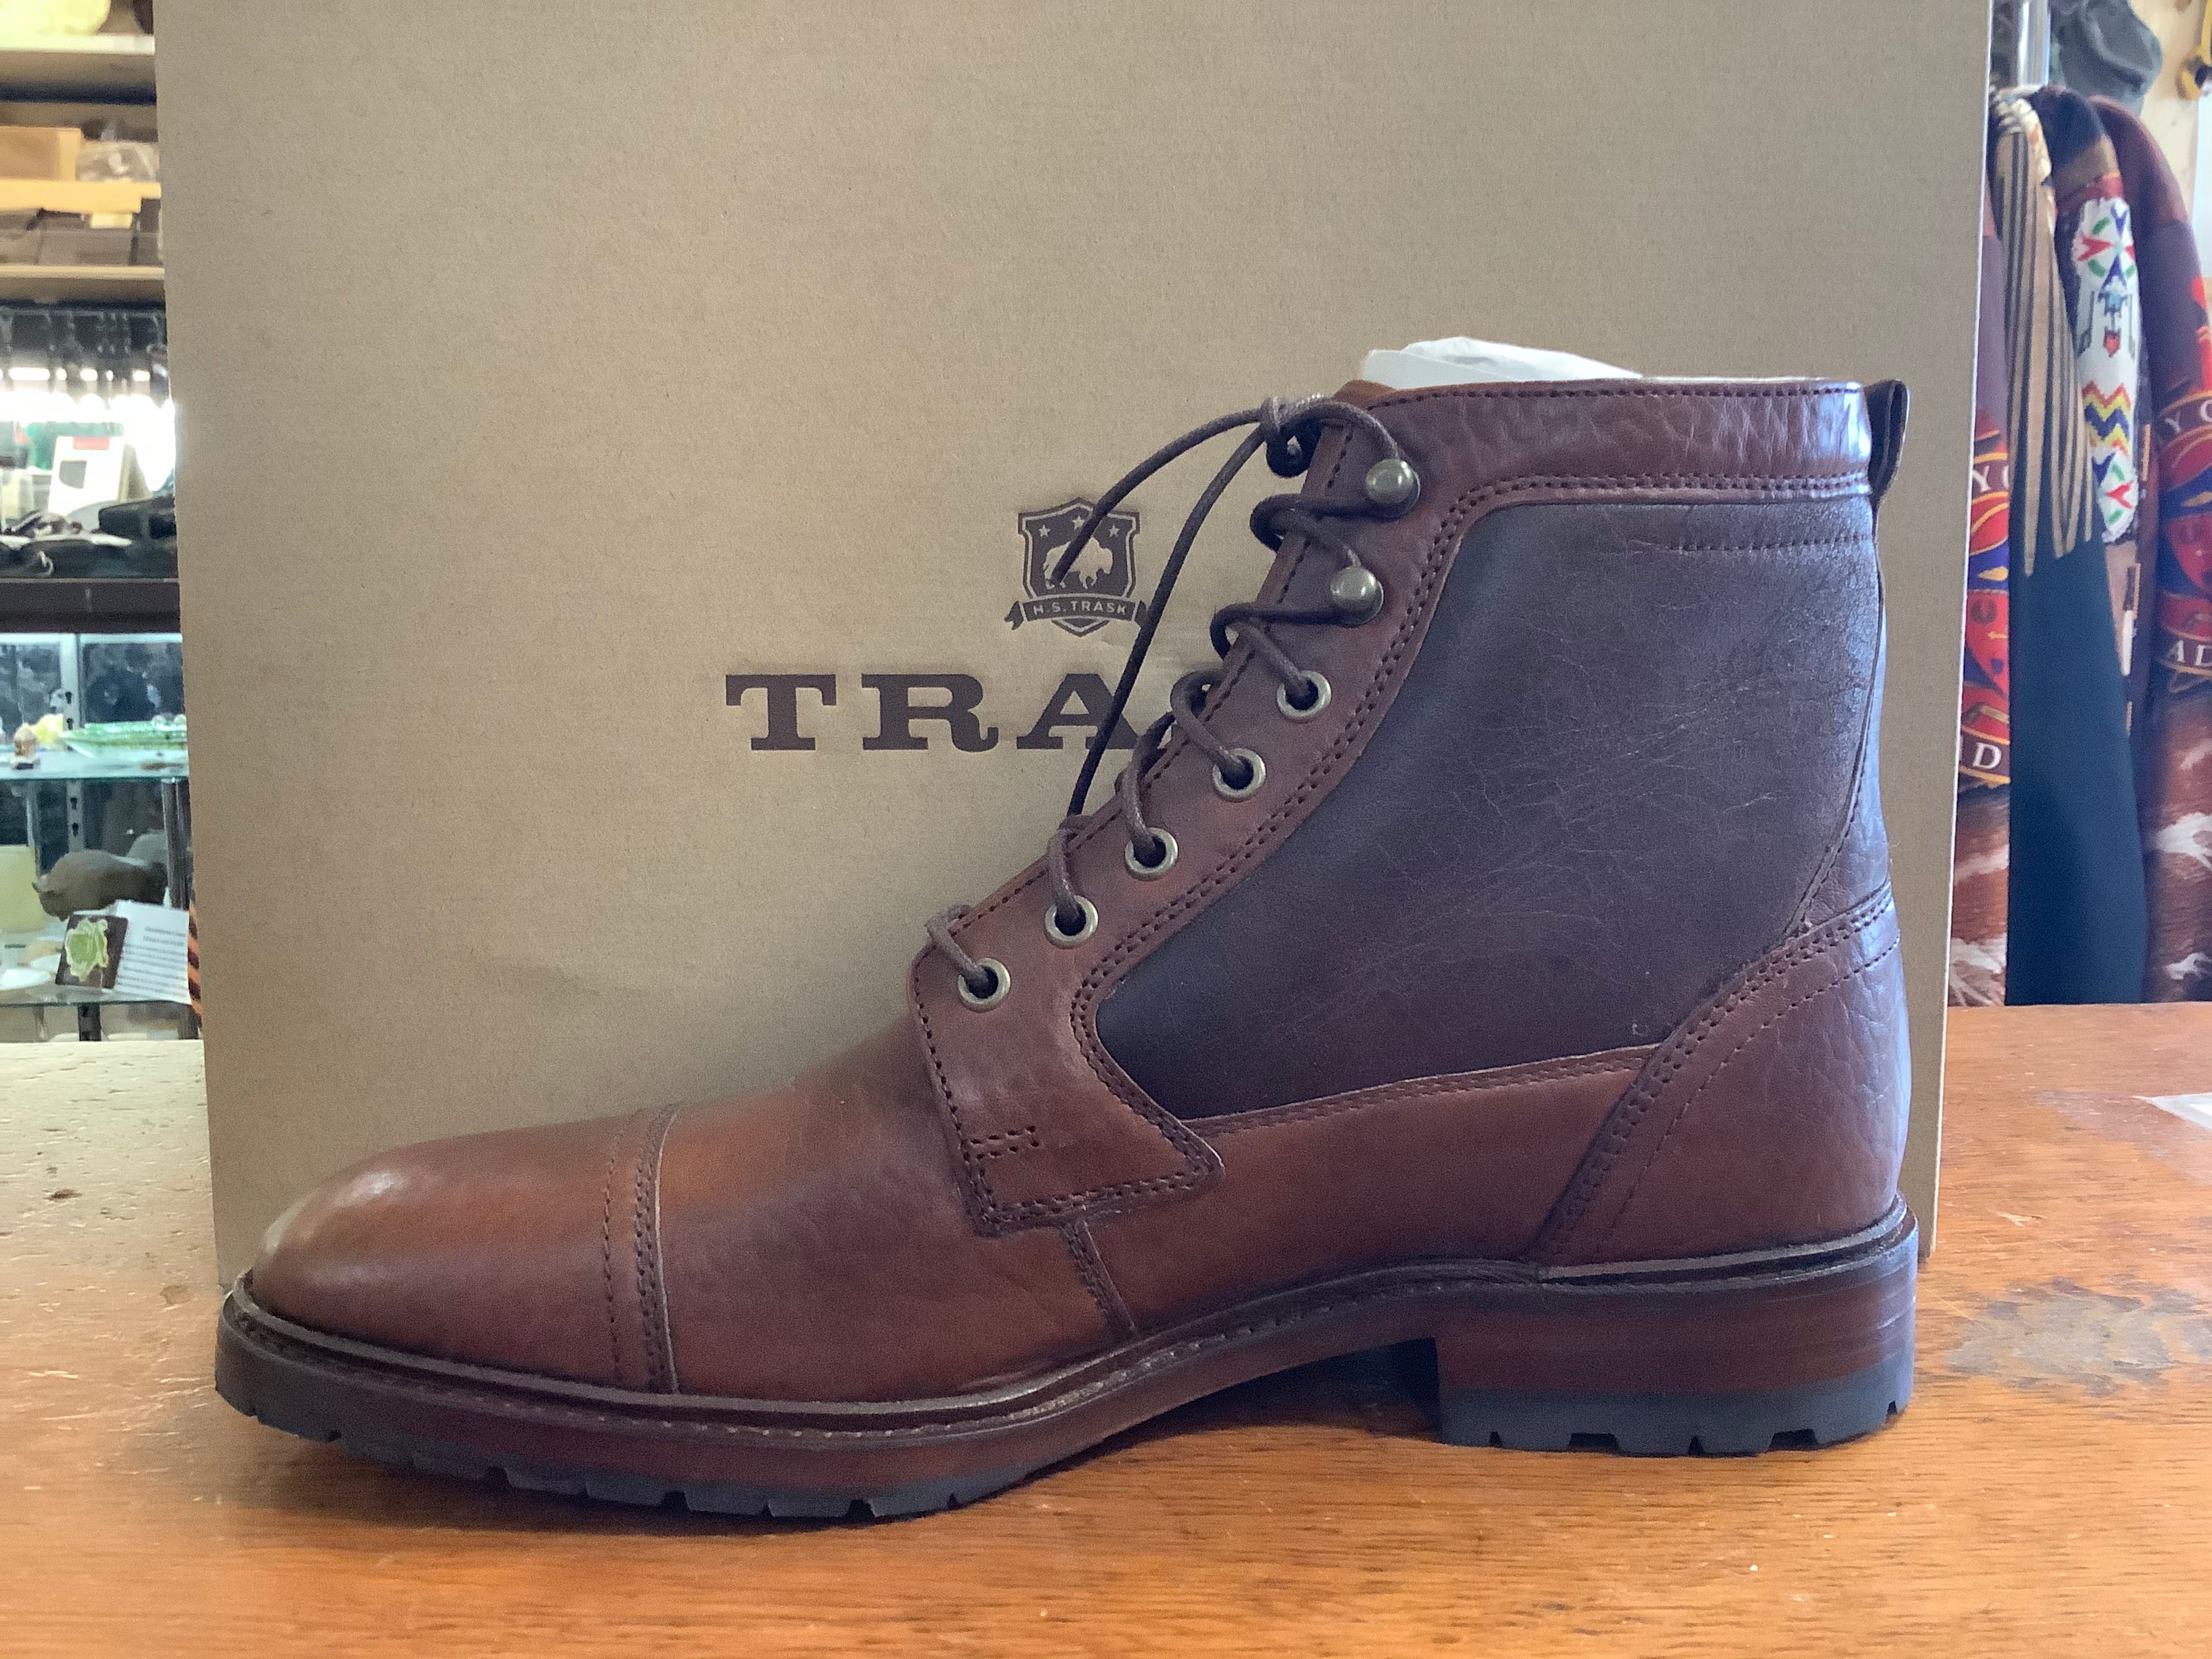 Trask "Lowell" Saddle Tan Bison - shearling lined 3/4 boot for city or country